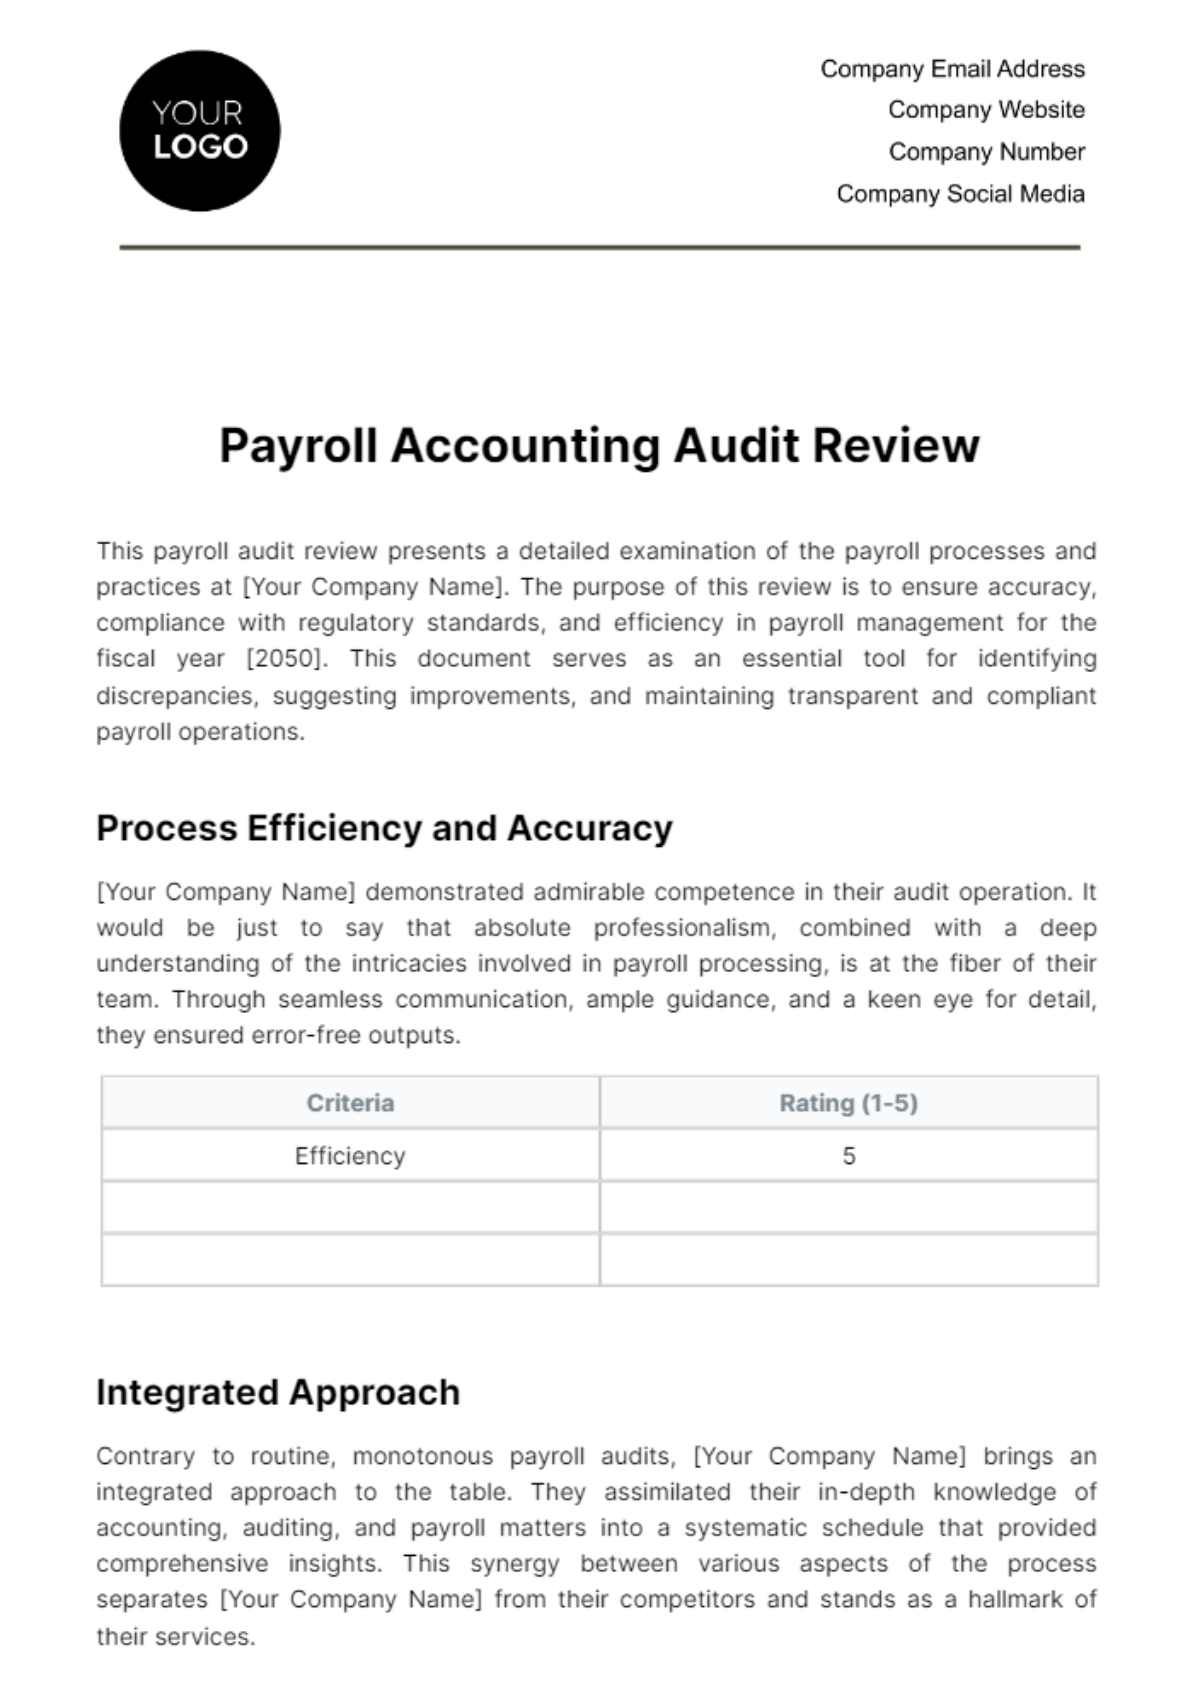 Payroll Accounting Audit Review Template